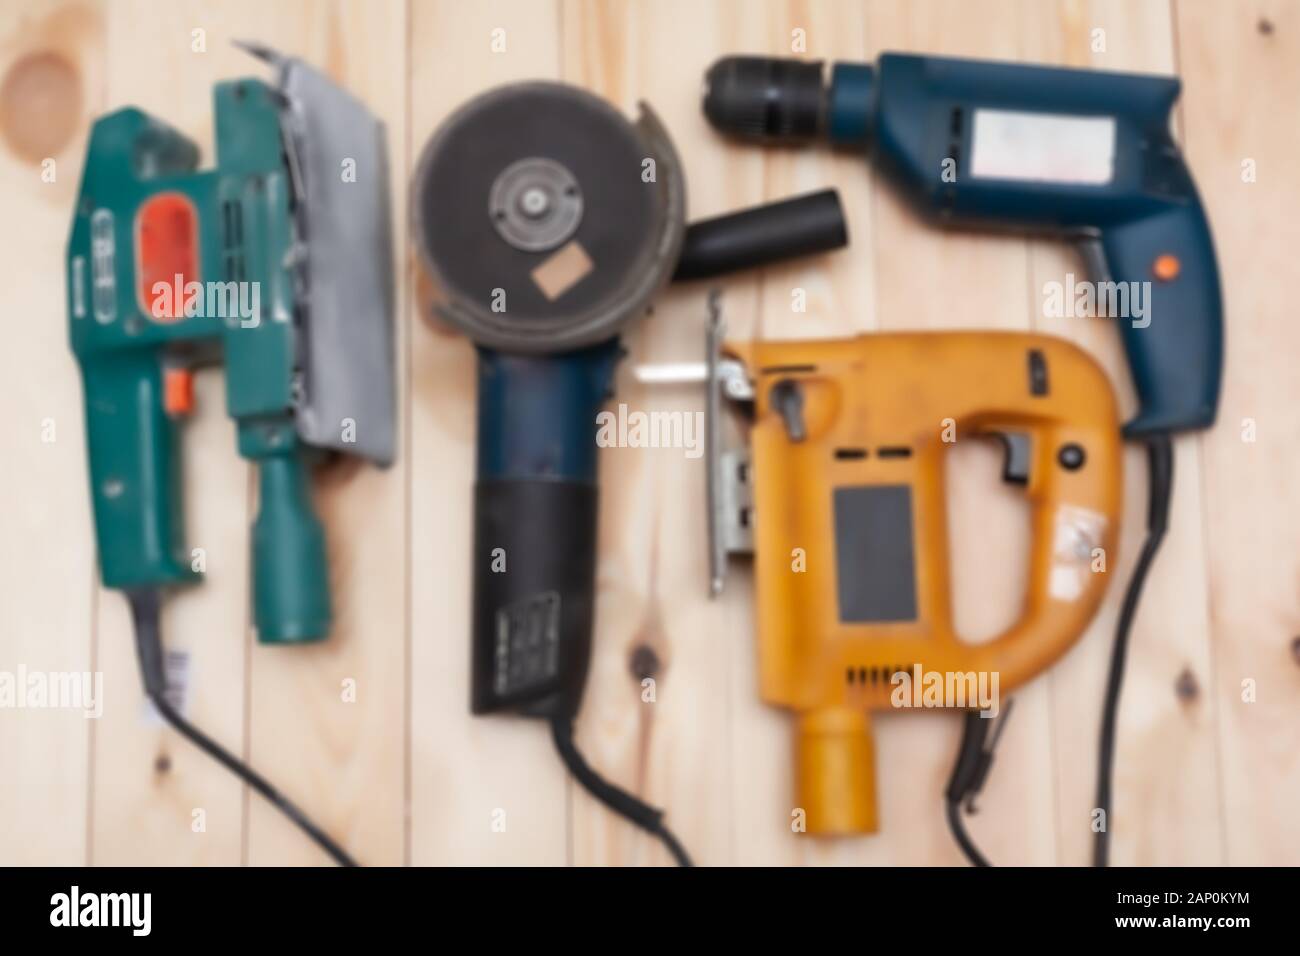 Set of construction tools on a wooden background. Stock photo out of focus assortment of electric tools. Stock Photo